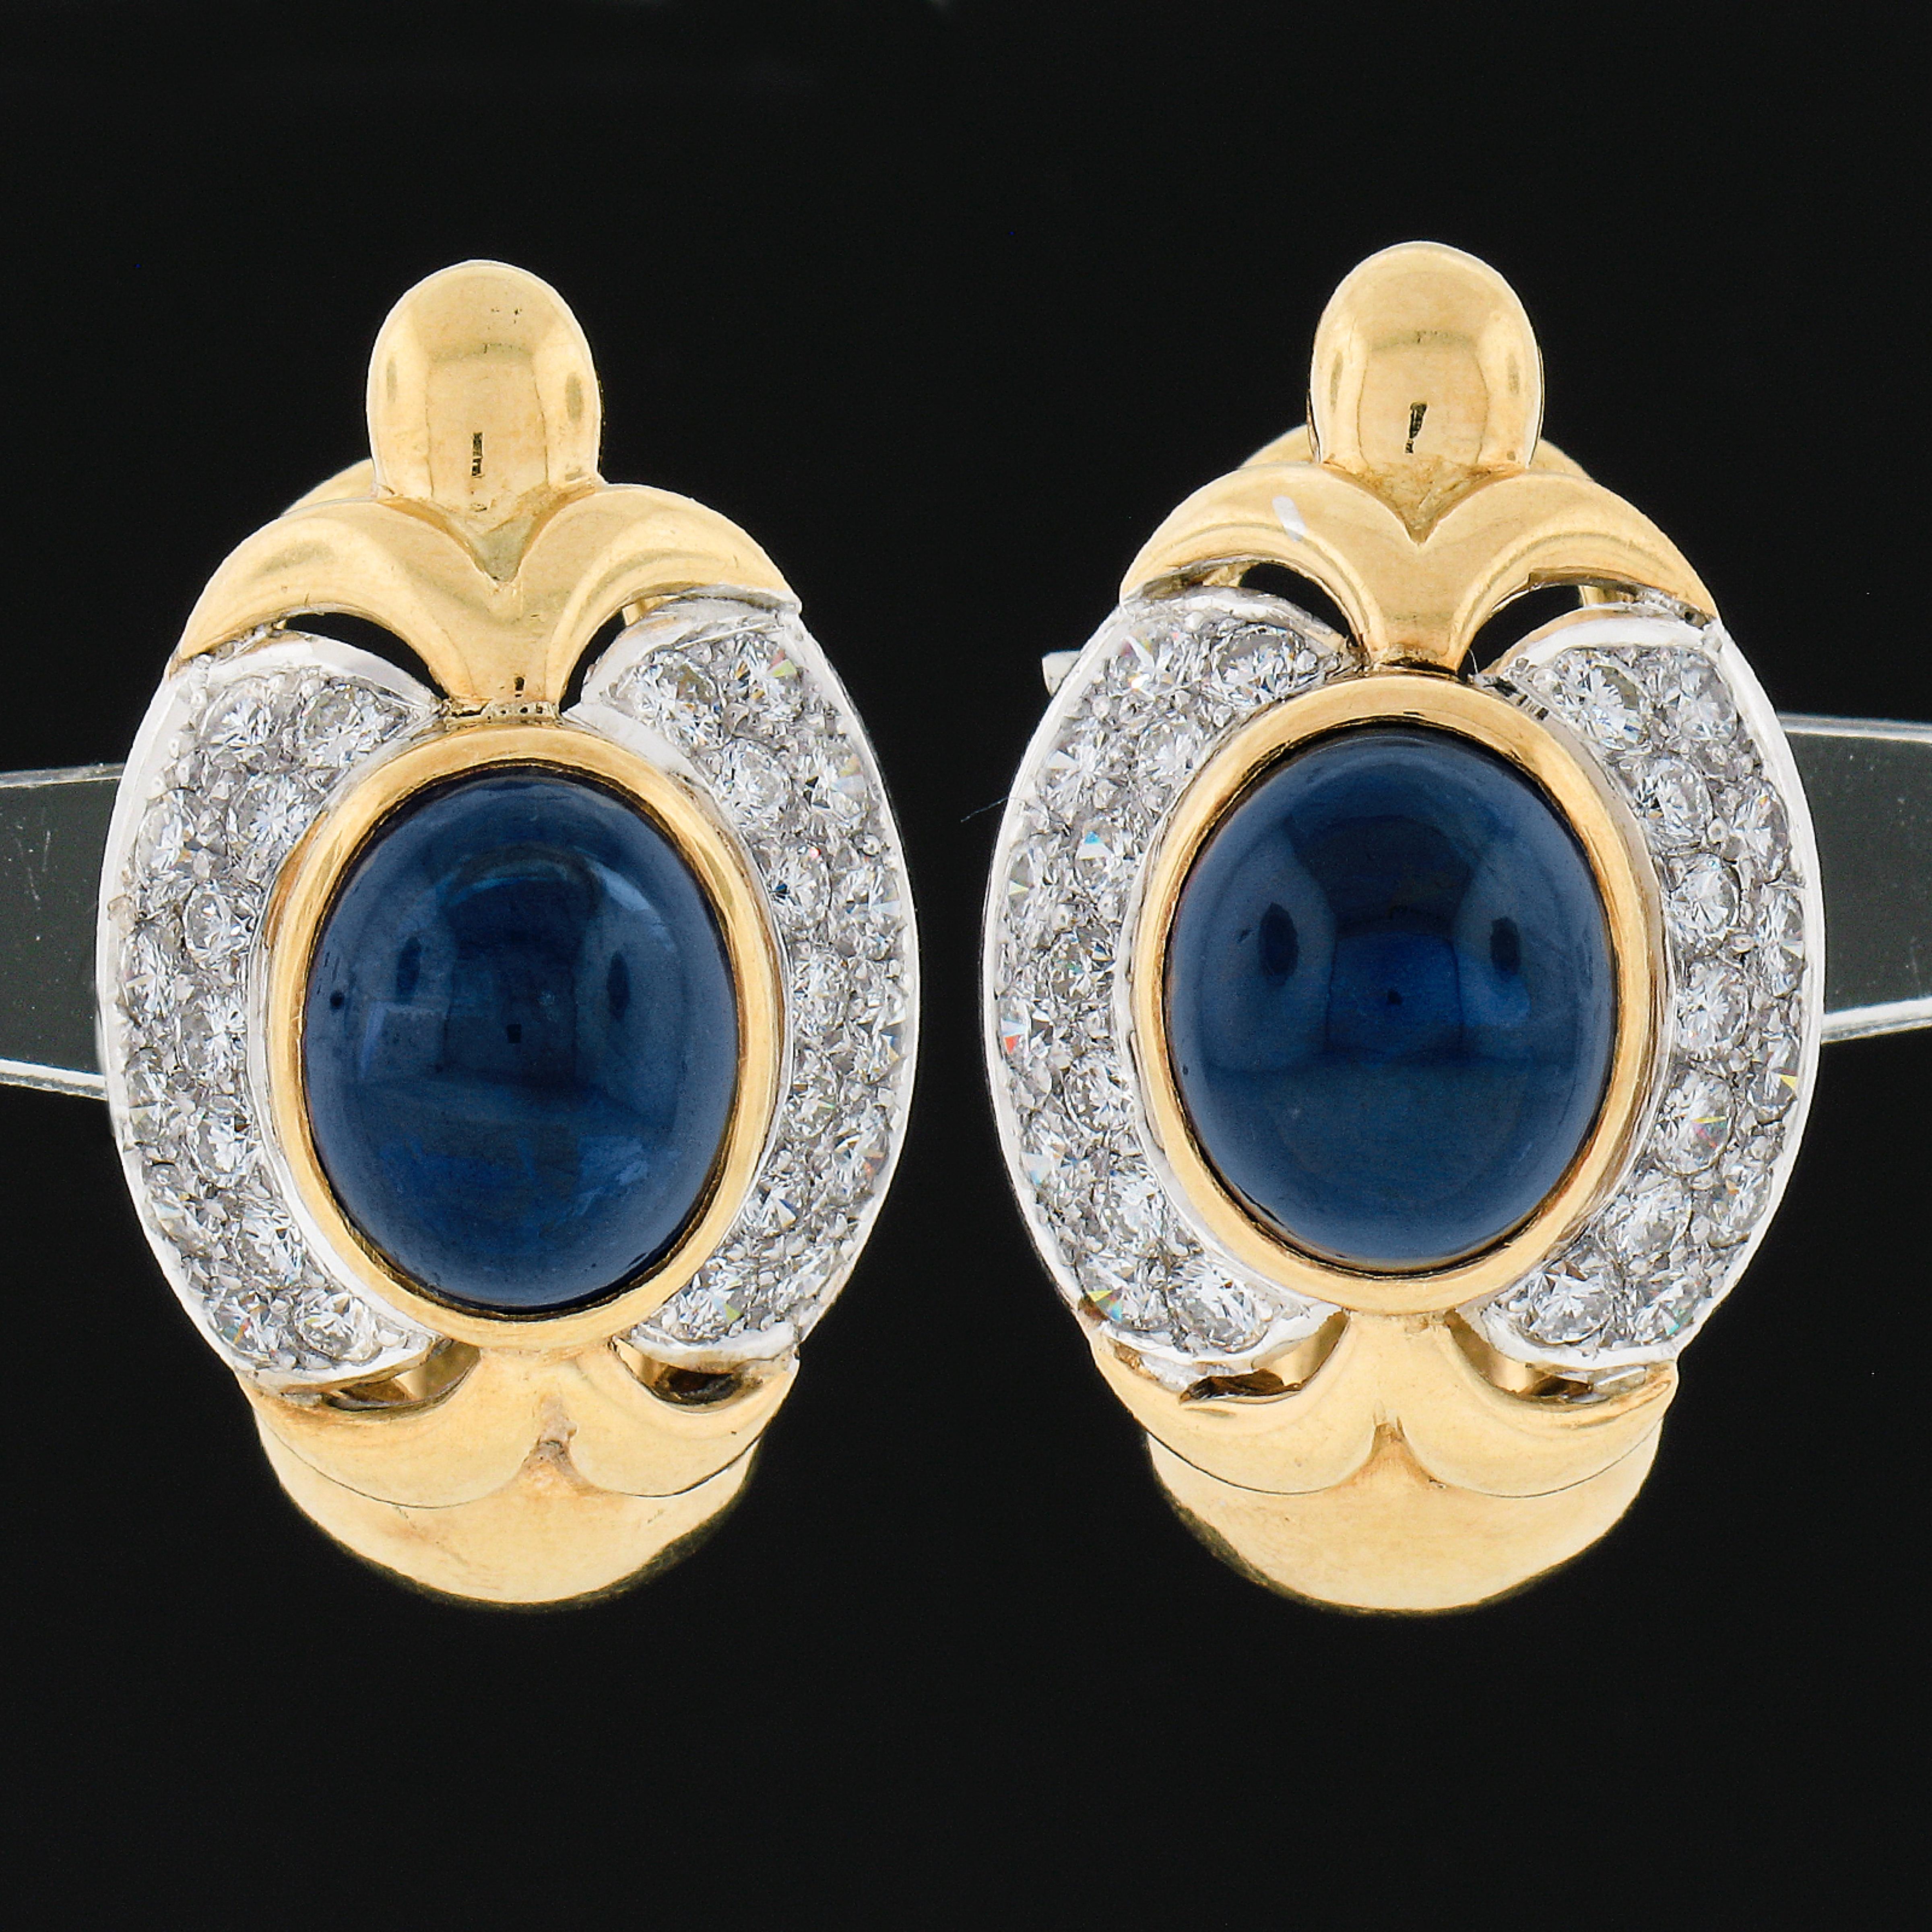 This magnificent pair of sapphire and diamond statement earrings was crafted from solid 18k yellow and white gold. The earrings feature a pair of beautiful, GIA certified, oval cabochon cut sapphires that are perfectly bezel set at the center of a